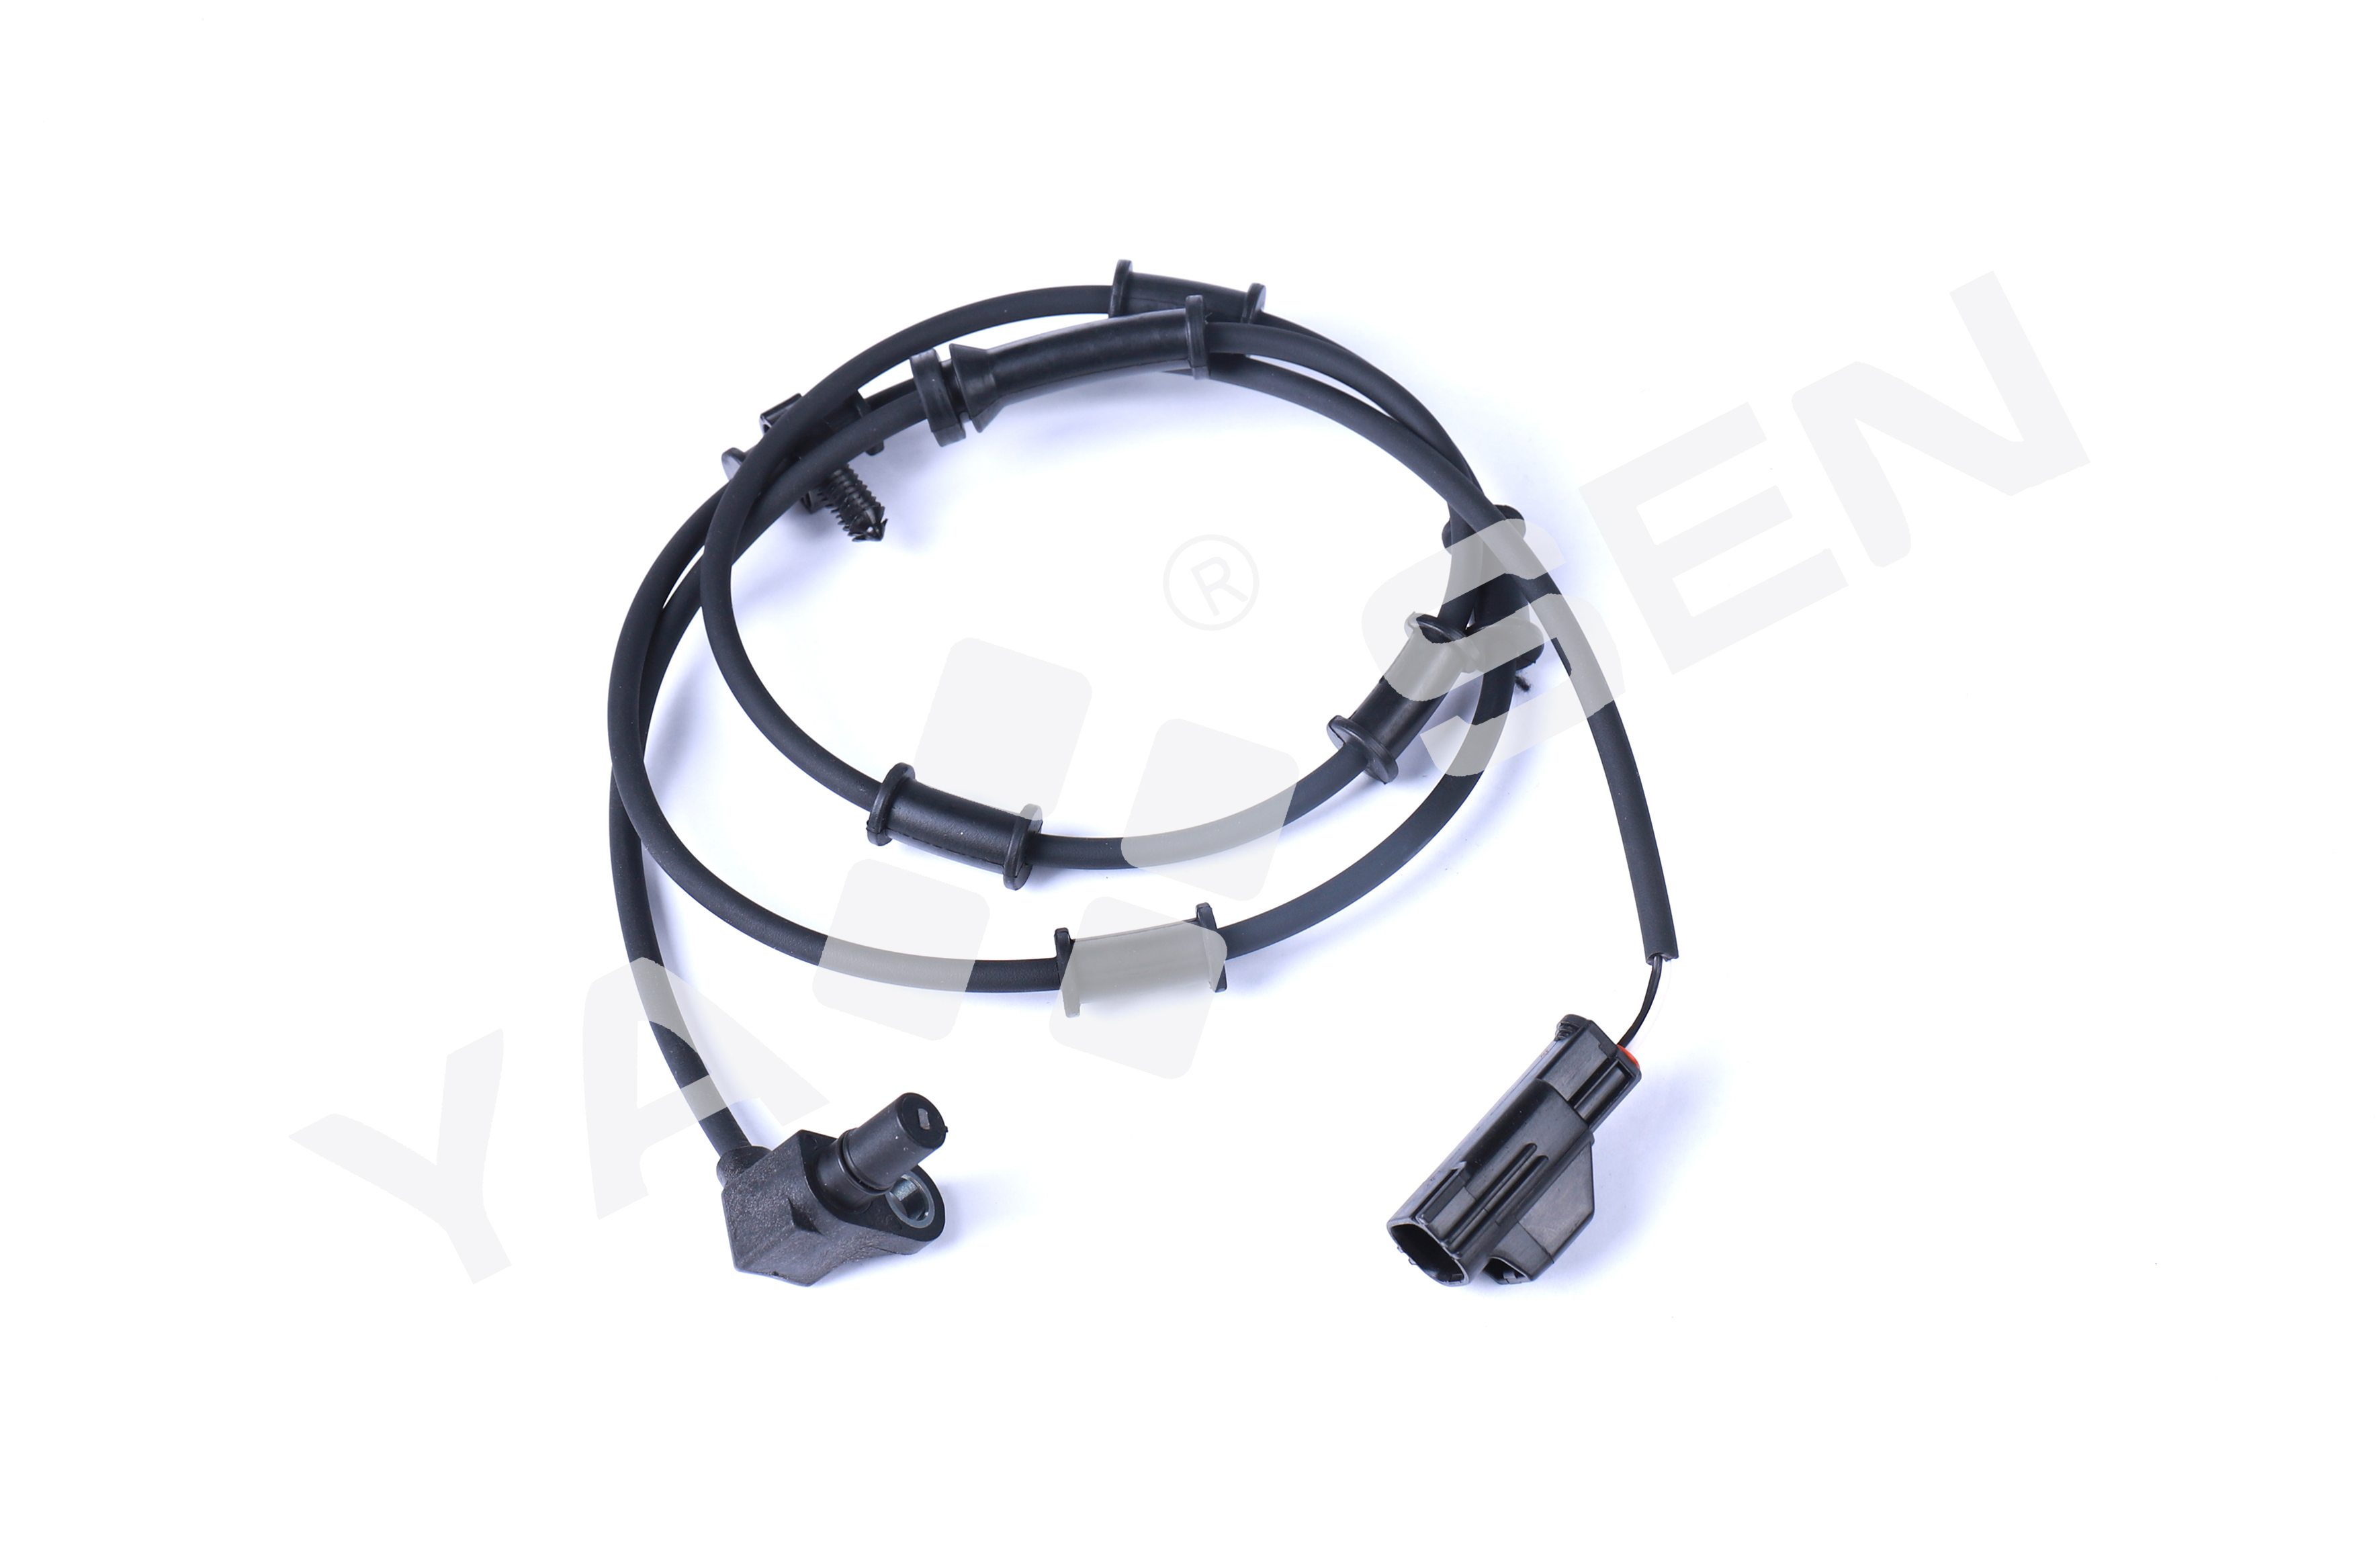 ABS Wheel Speed Sensor for DODGE/FORD, 5103493AA ALS102 970-088 ABS21 5S7013 SU8505 1802-304029 72-6133